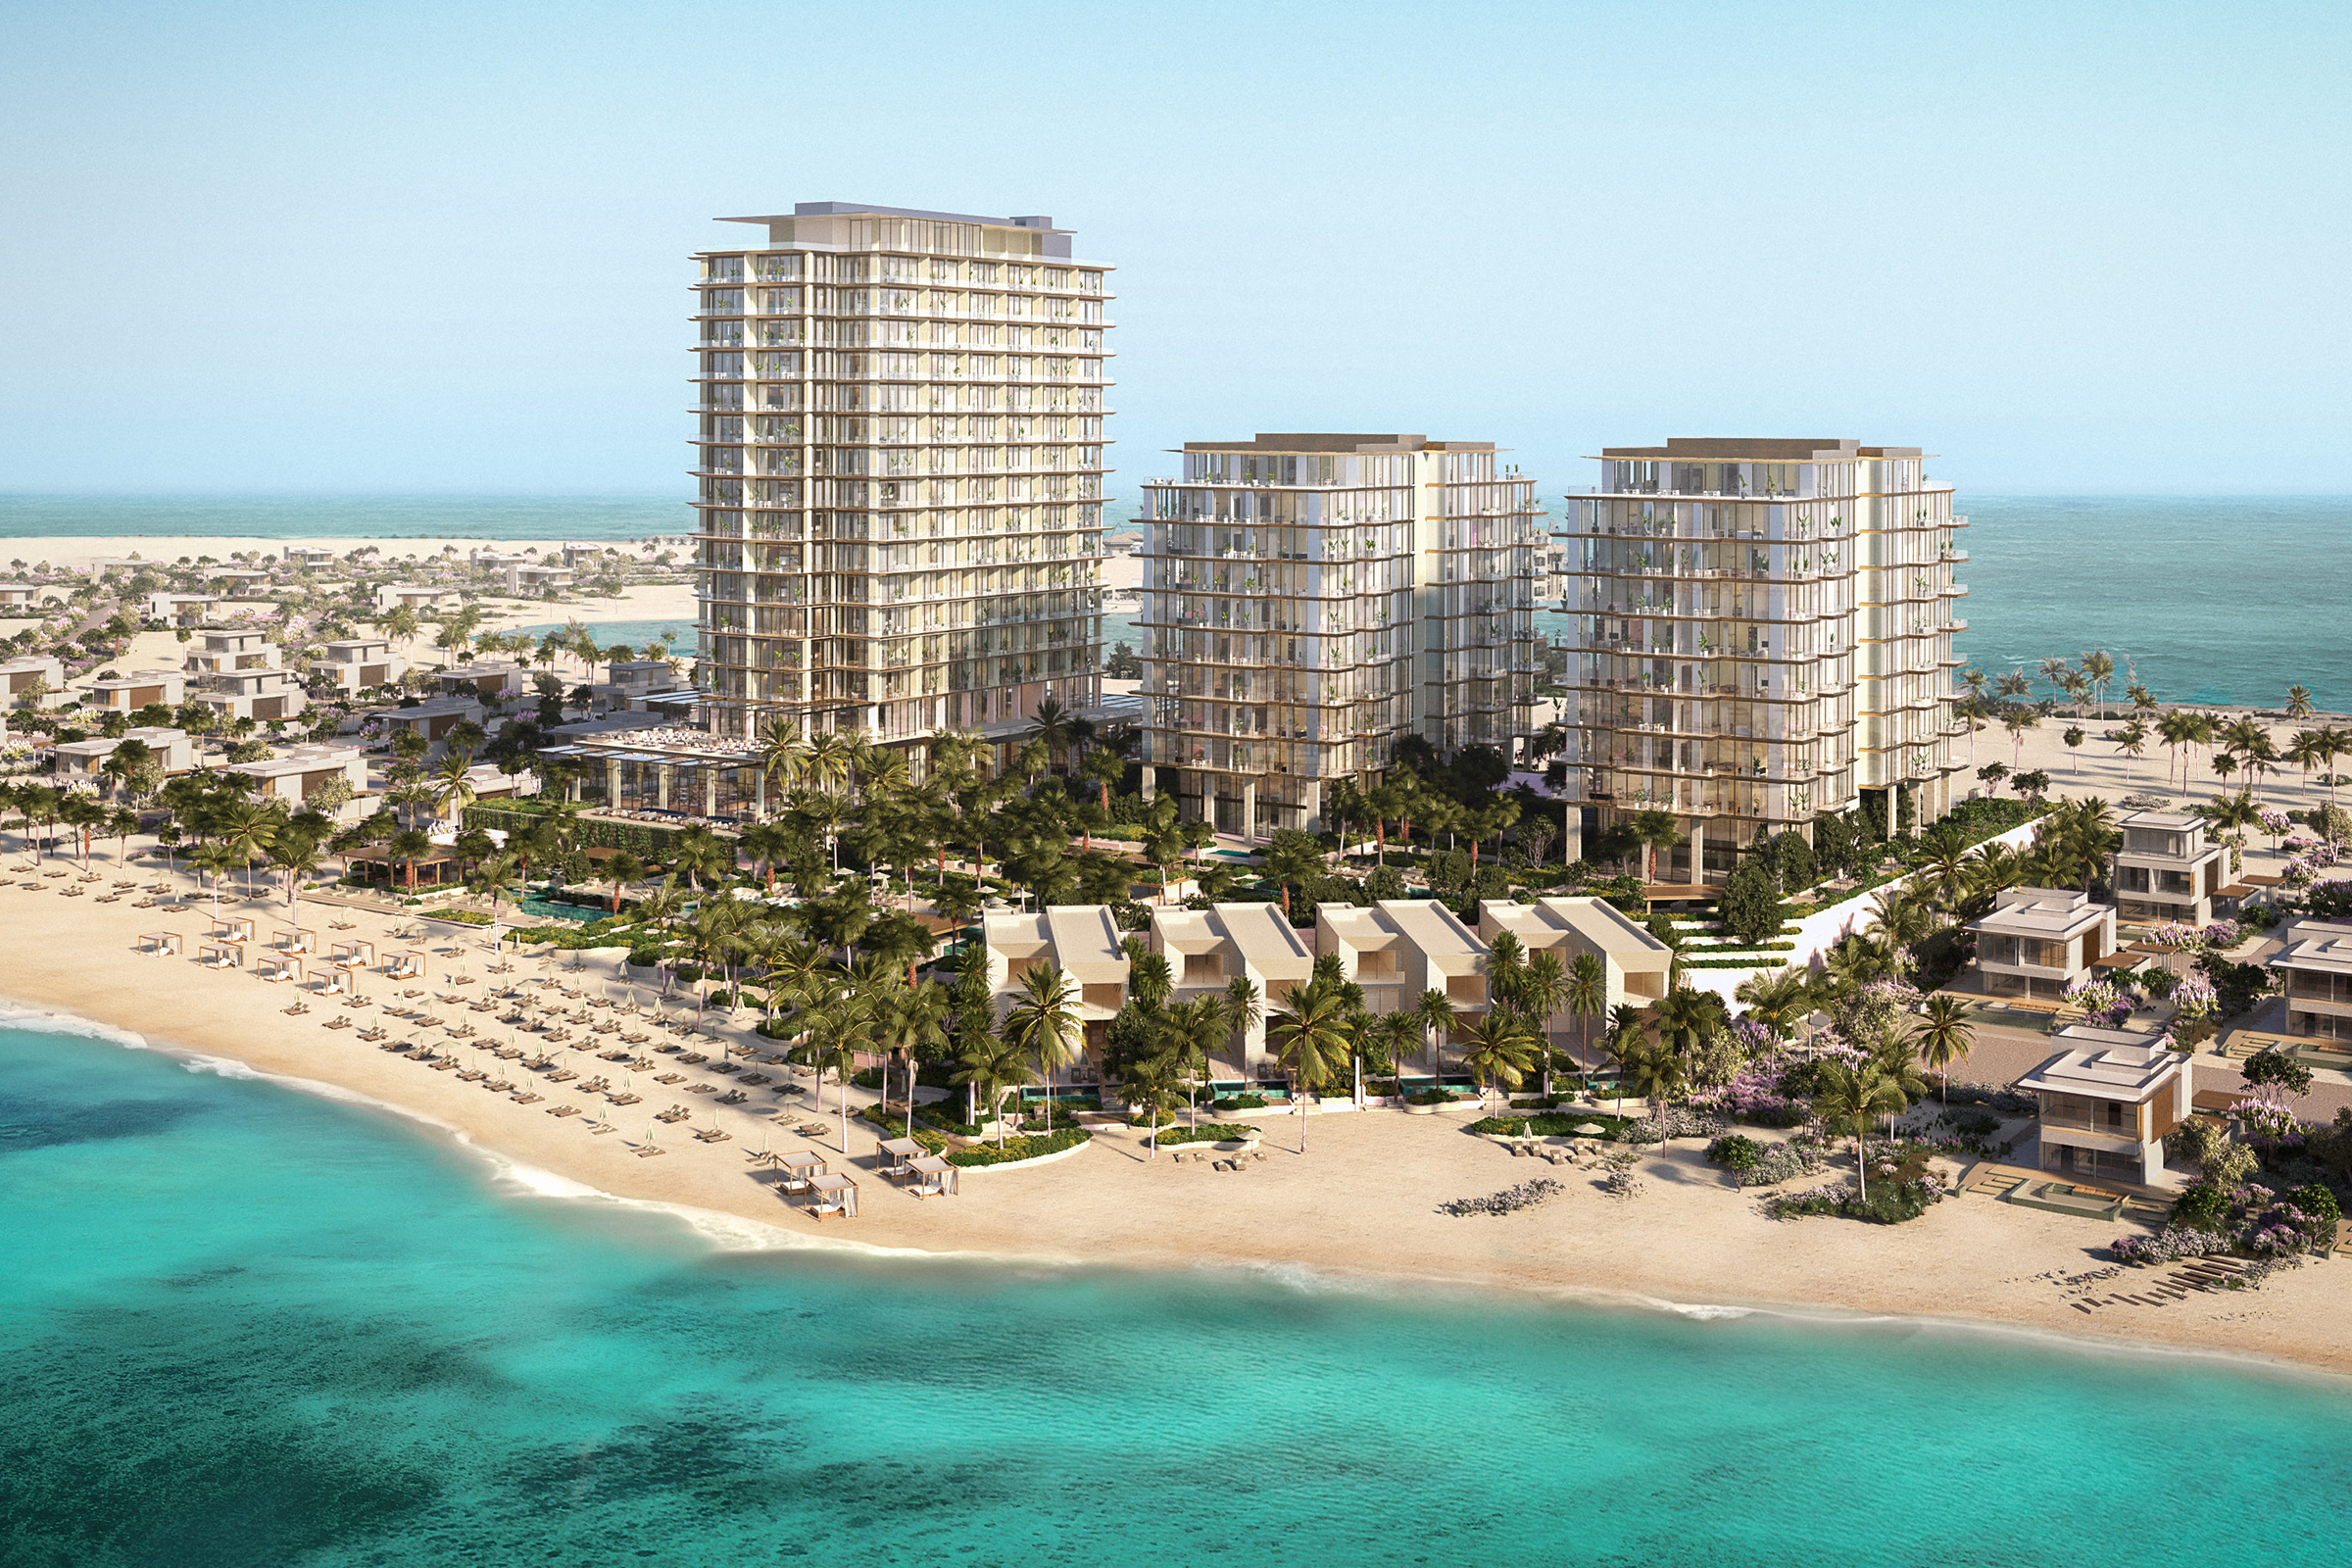 Luxurious serviced residences situated in the waterfront of Al Marjan Island